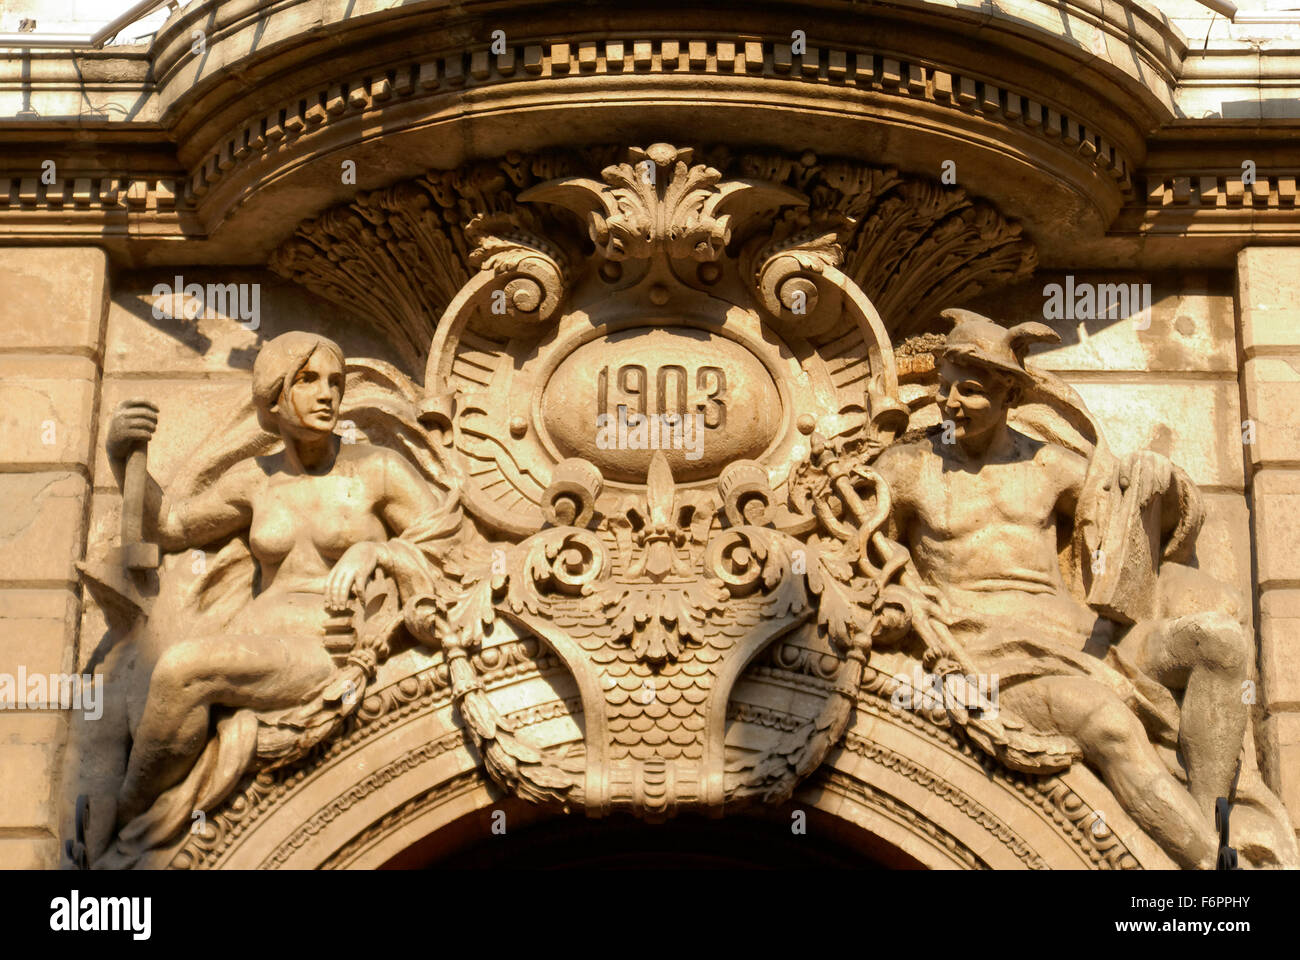 Ornate sculpture with figures representing industry and commerce above the door of the Casino Espanol building, Centro Historico, Mexico City Stock Photo